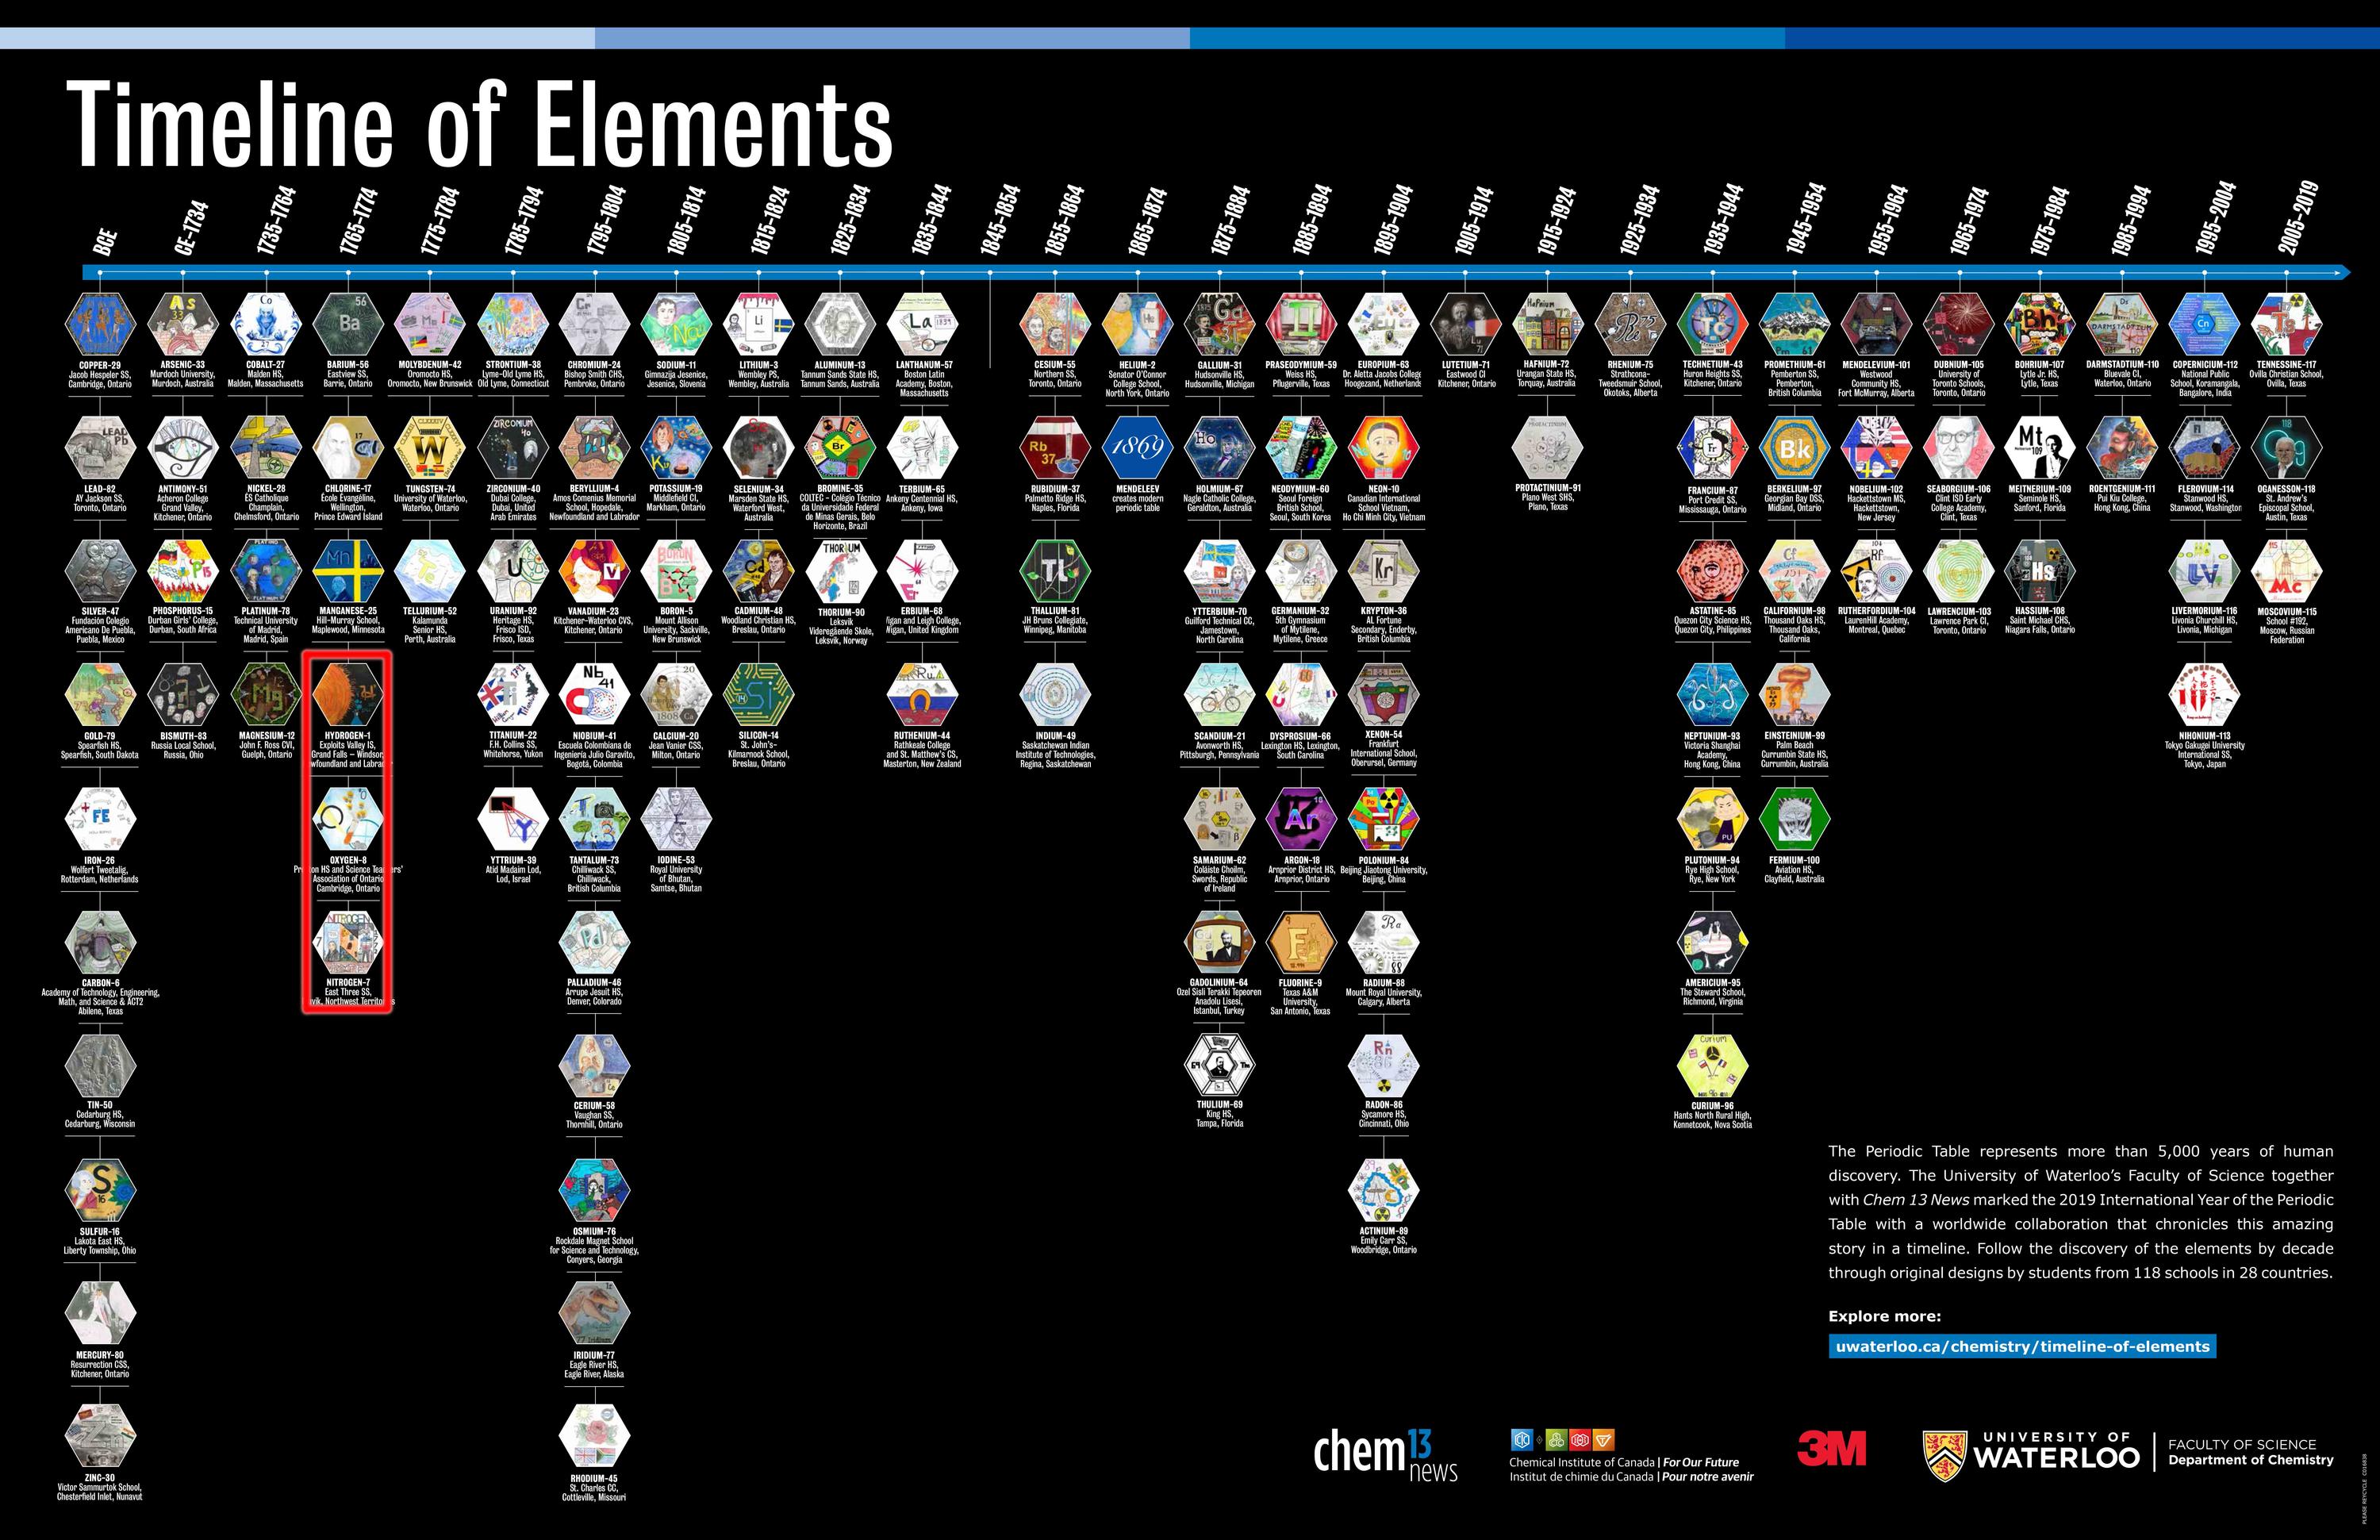 timeline of elements based on their discovery by decades with oxygen, hydrogen and nitrogen